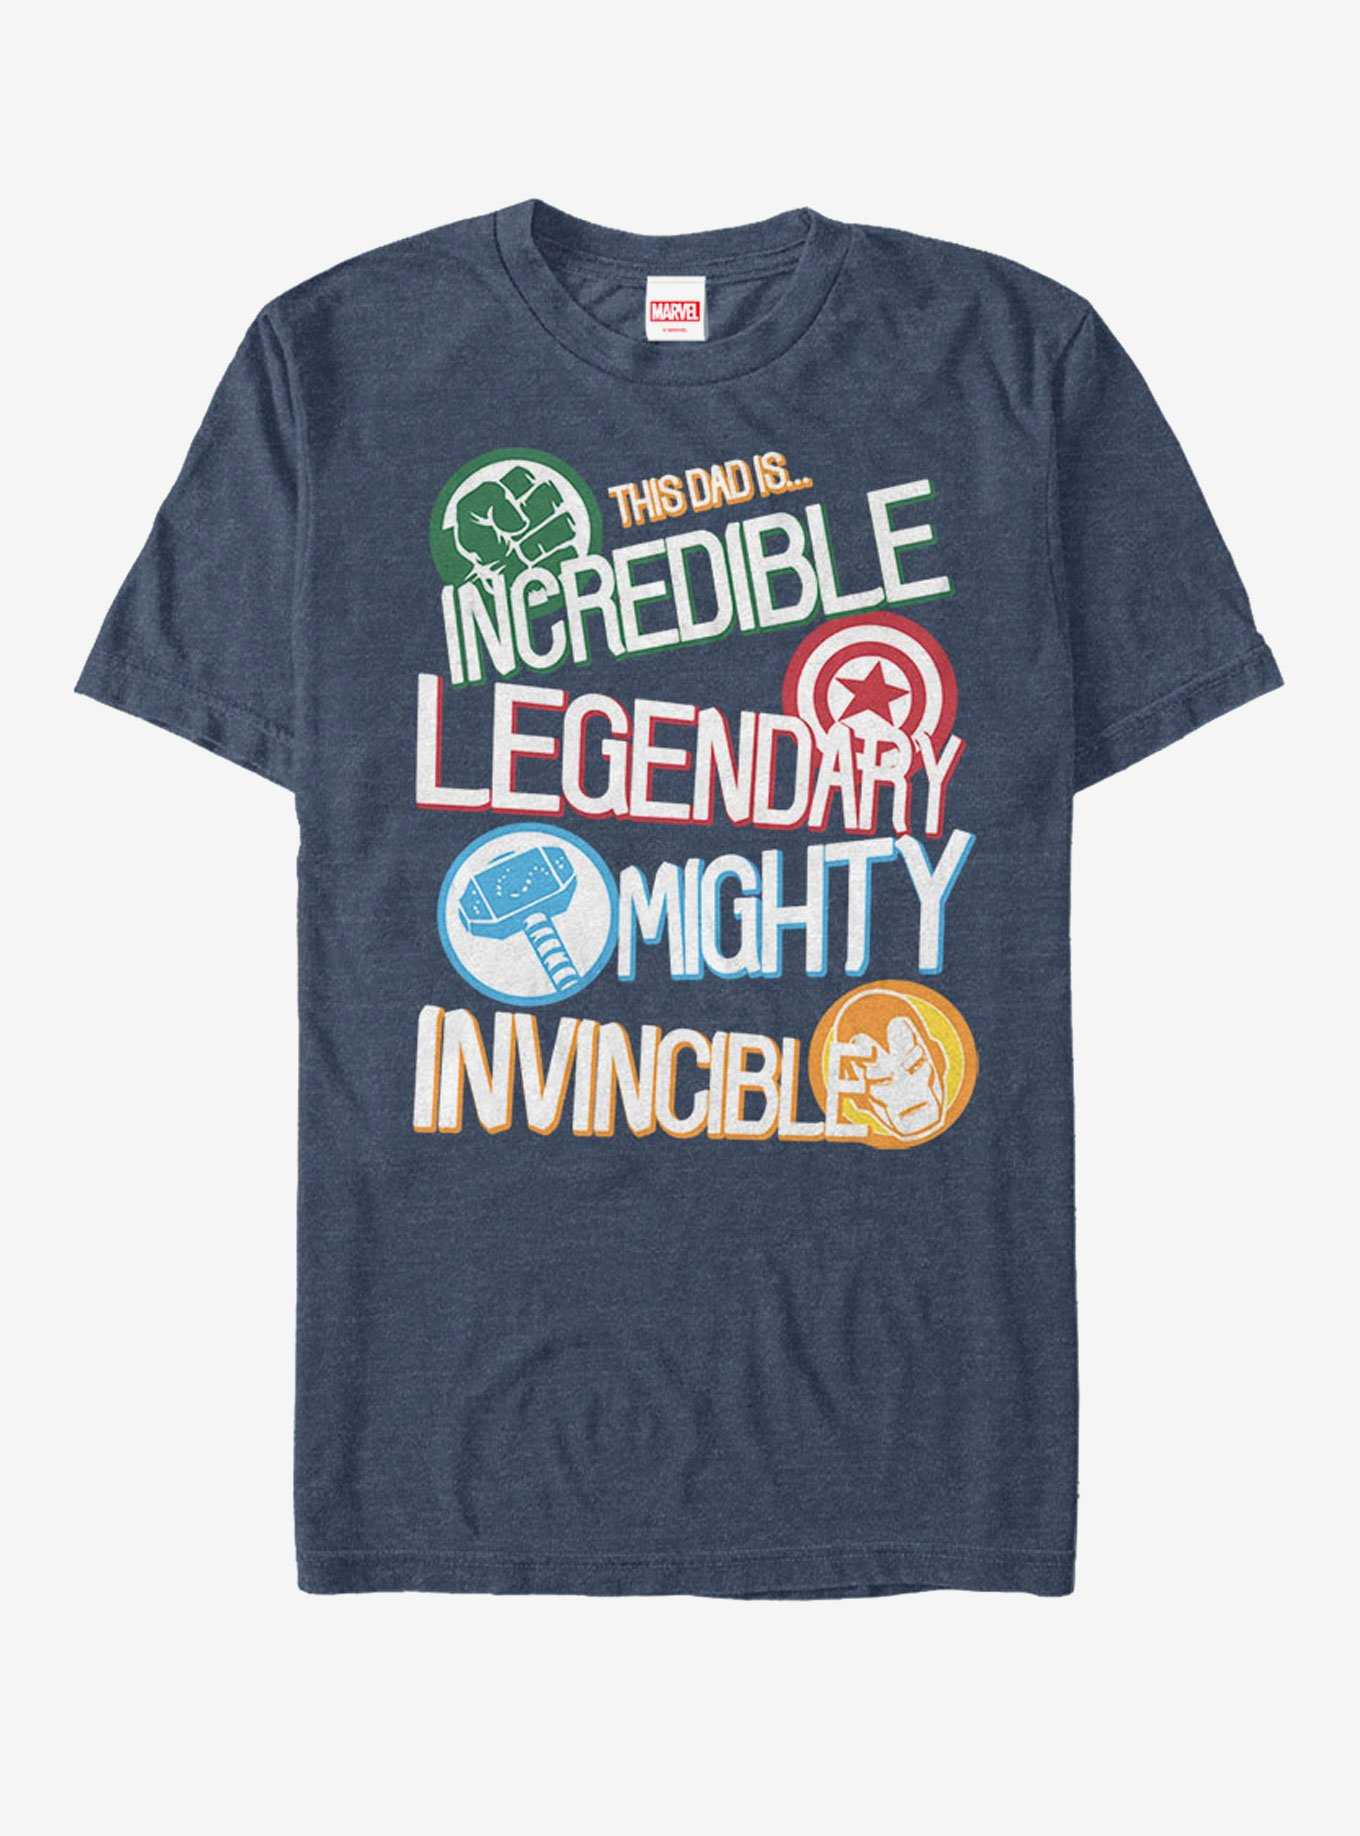 Marvel The Avengers Dad Words T-Shirt, , hi-res